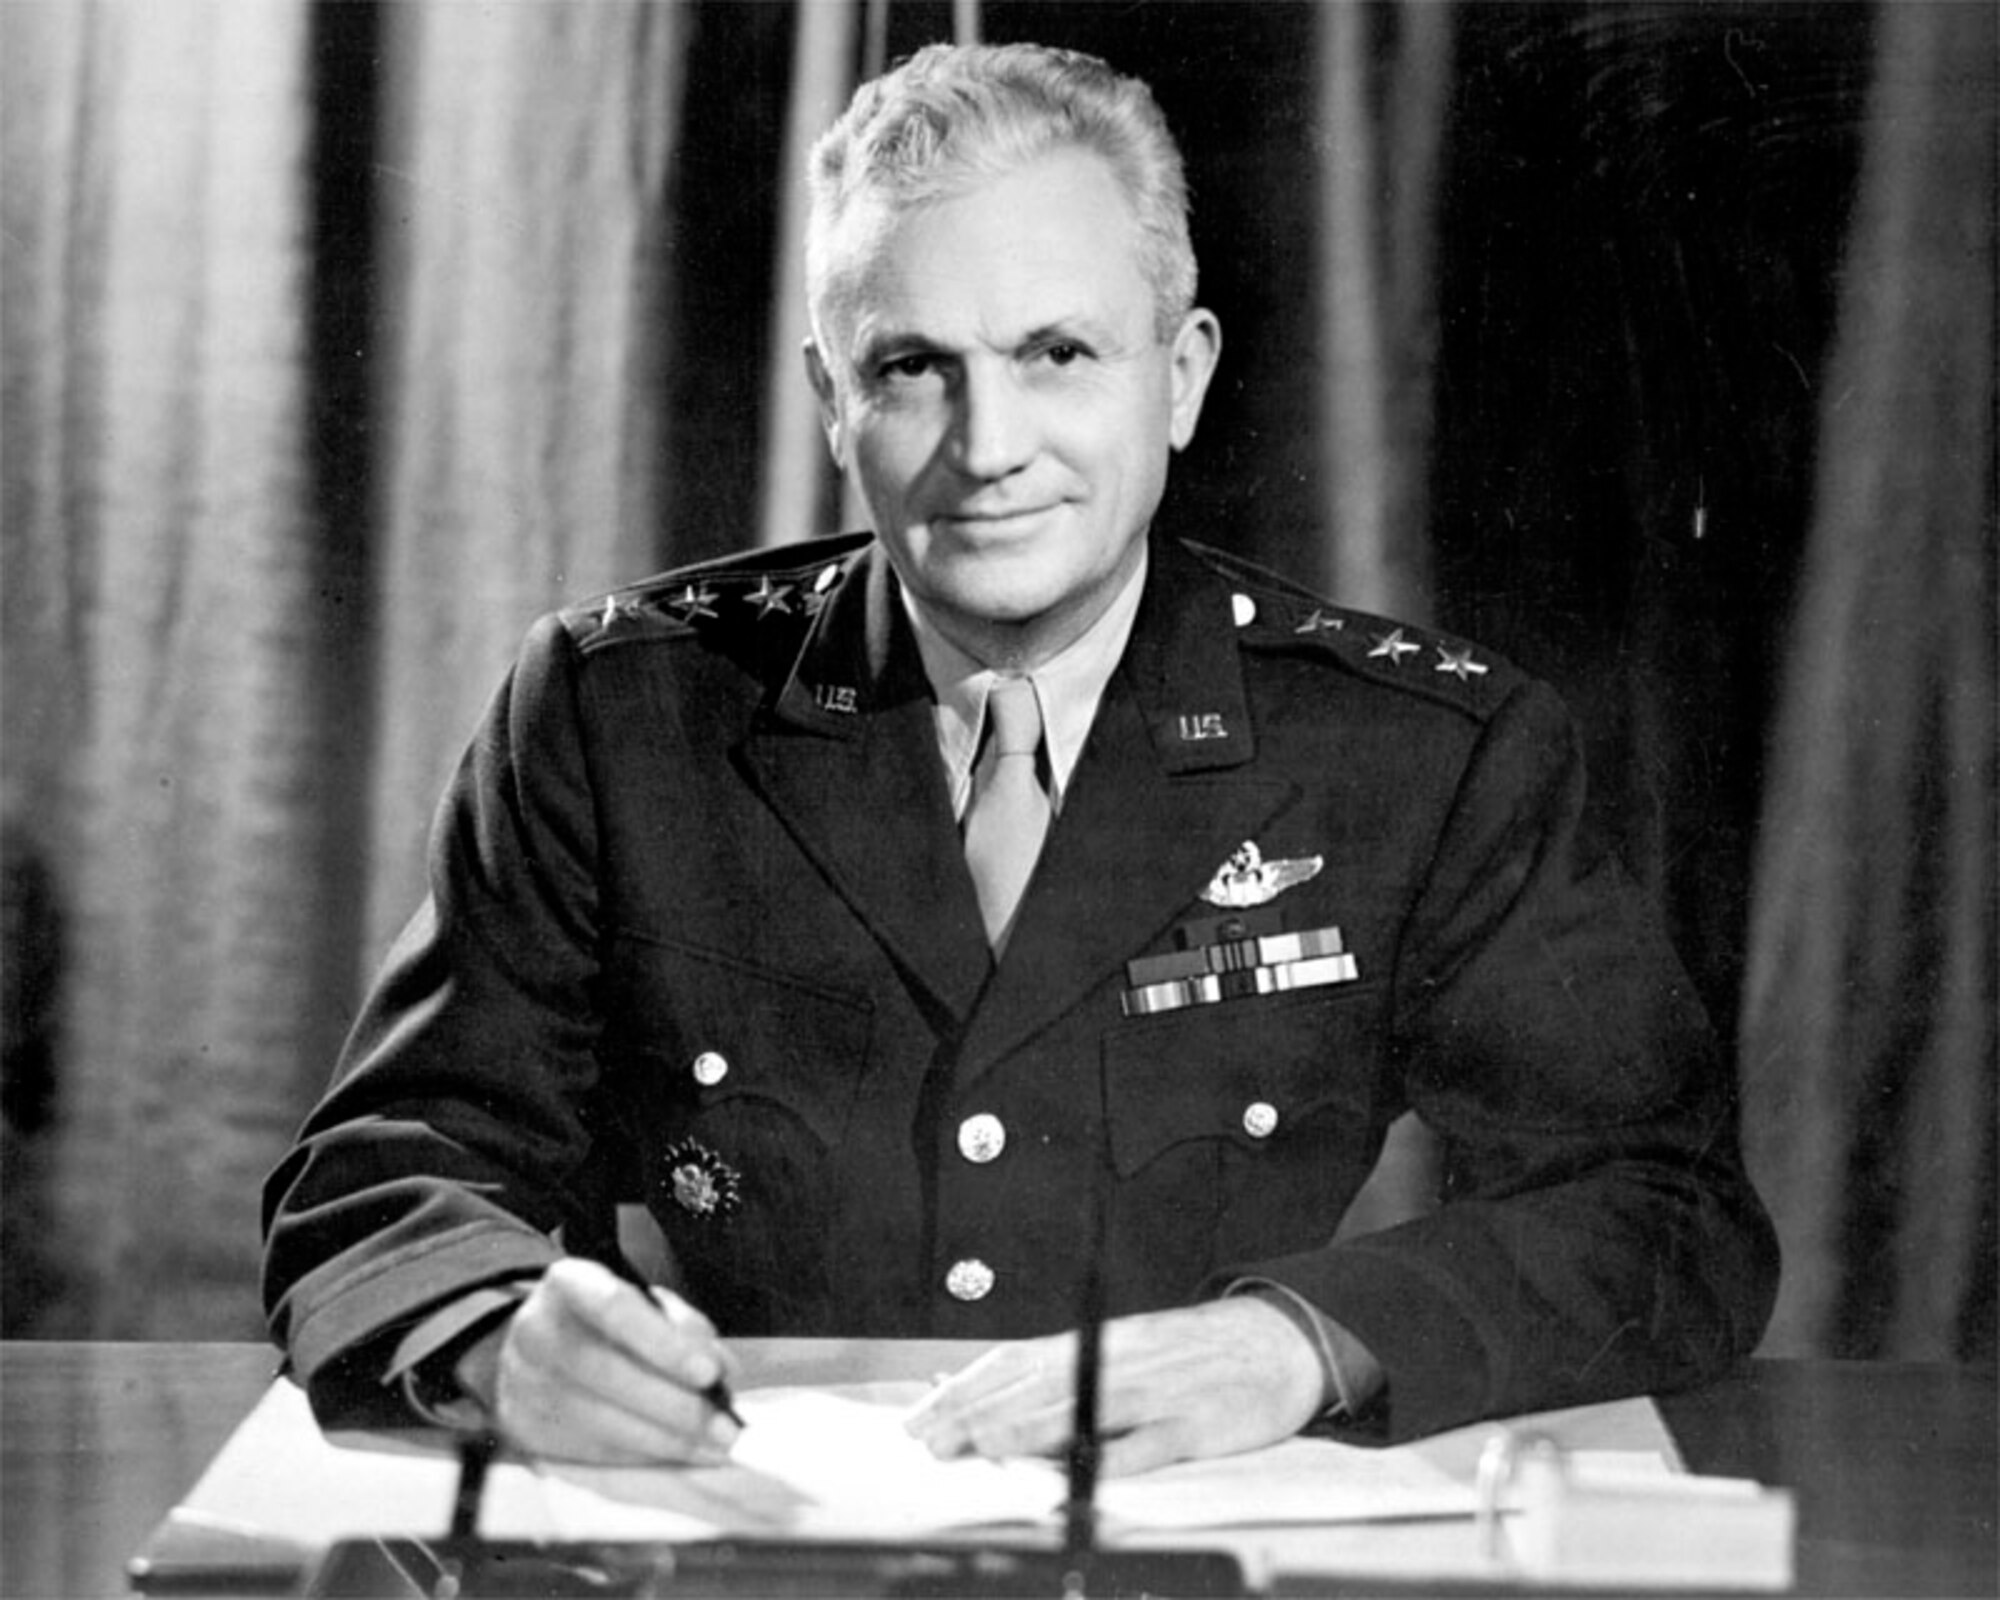 Gen. Frank M. Andrews, theater commander of U.S. forces in the European theater of operations, was responsible for direction of the American strategic bombing campaign against Germany and planning the land invasion of occupied western Europe in 1943. 
